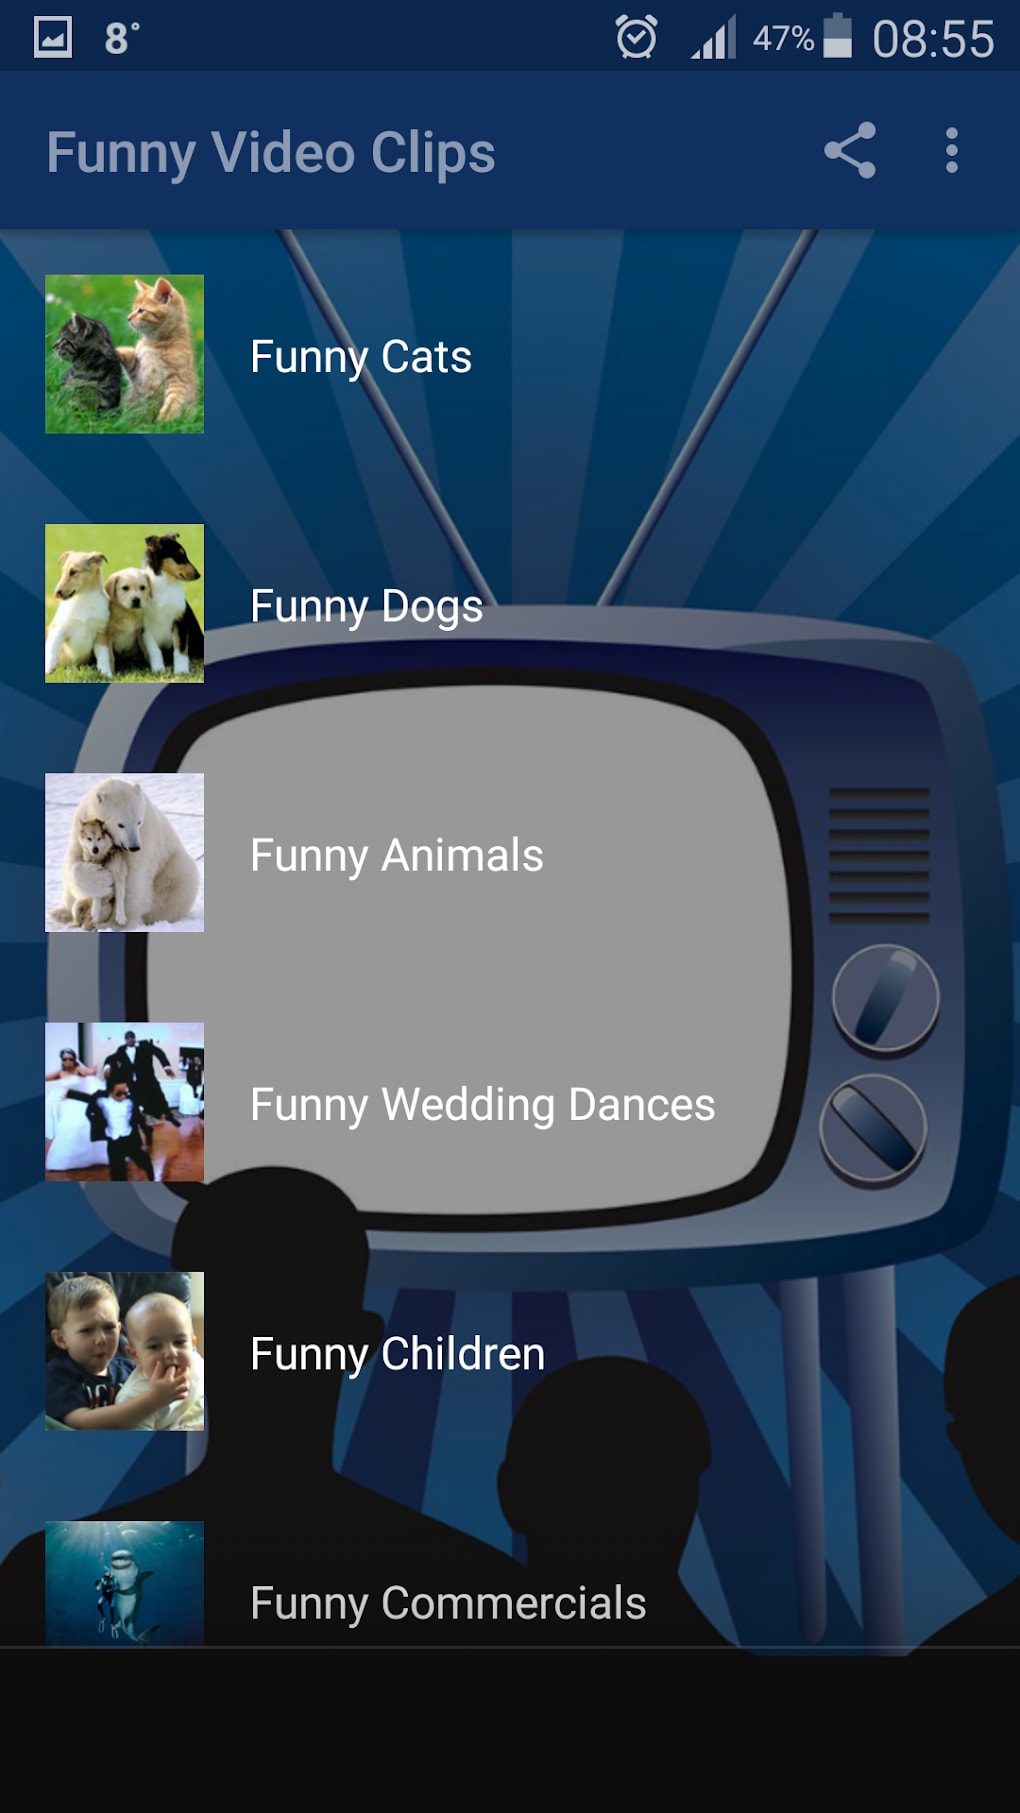 Funny Video Clips for Android - Download